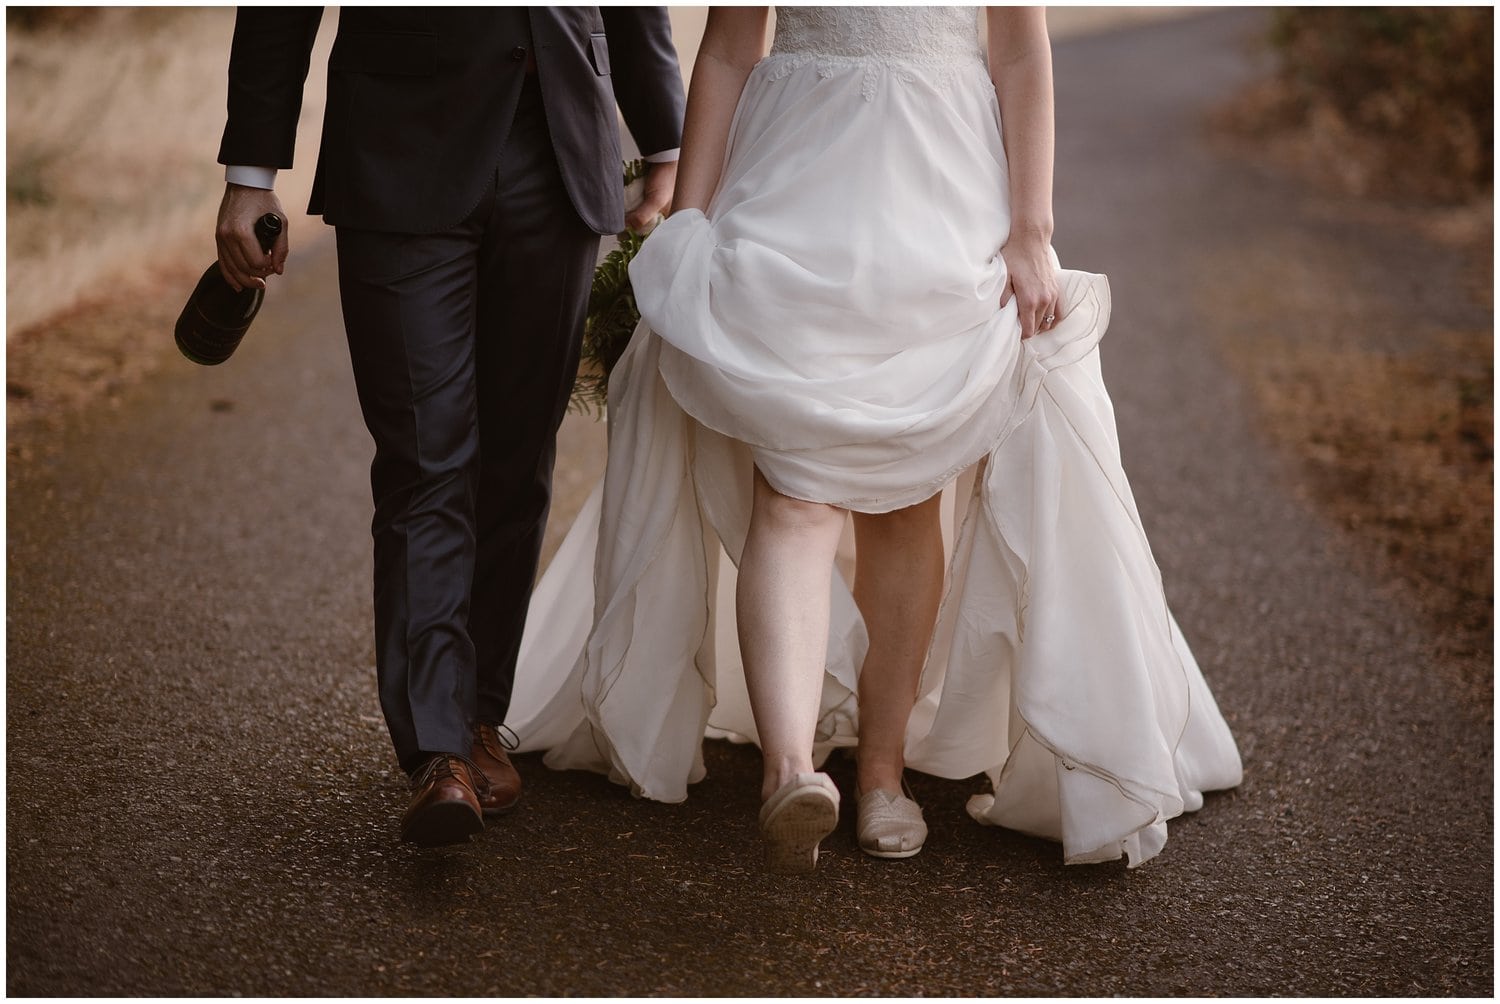 Bride and groom walking along a road together. Bride it holding up the skirt of her dress to show her shoes. 